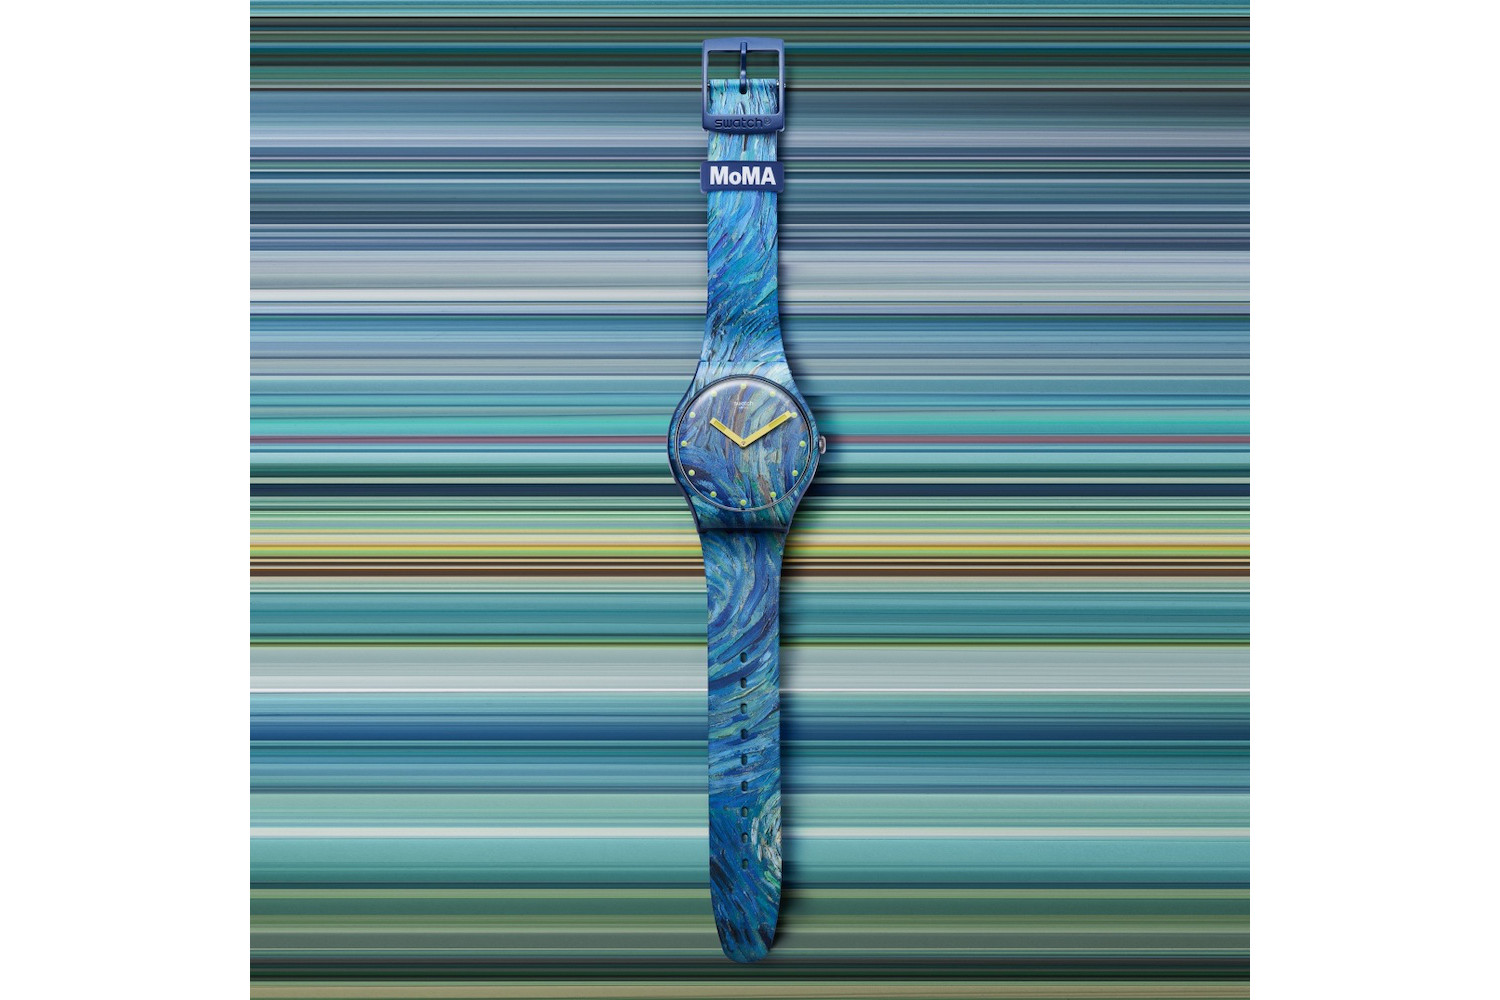 SWATCH X MoMA – Special Edition Watches Launched | | Flash Art